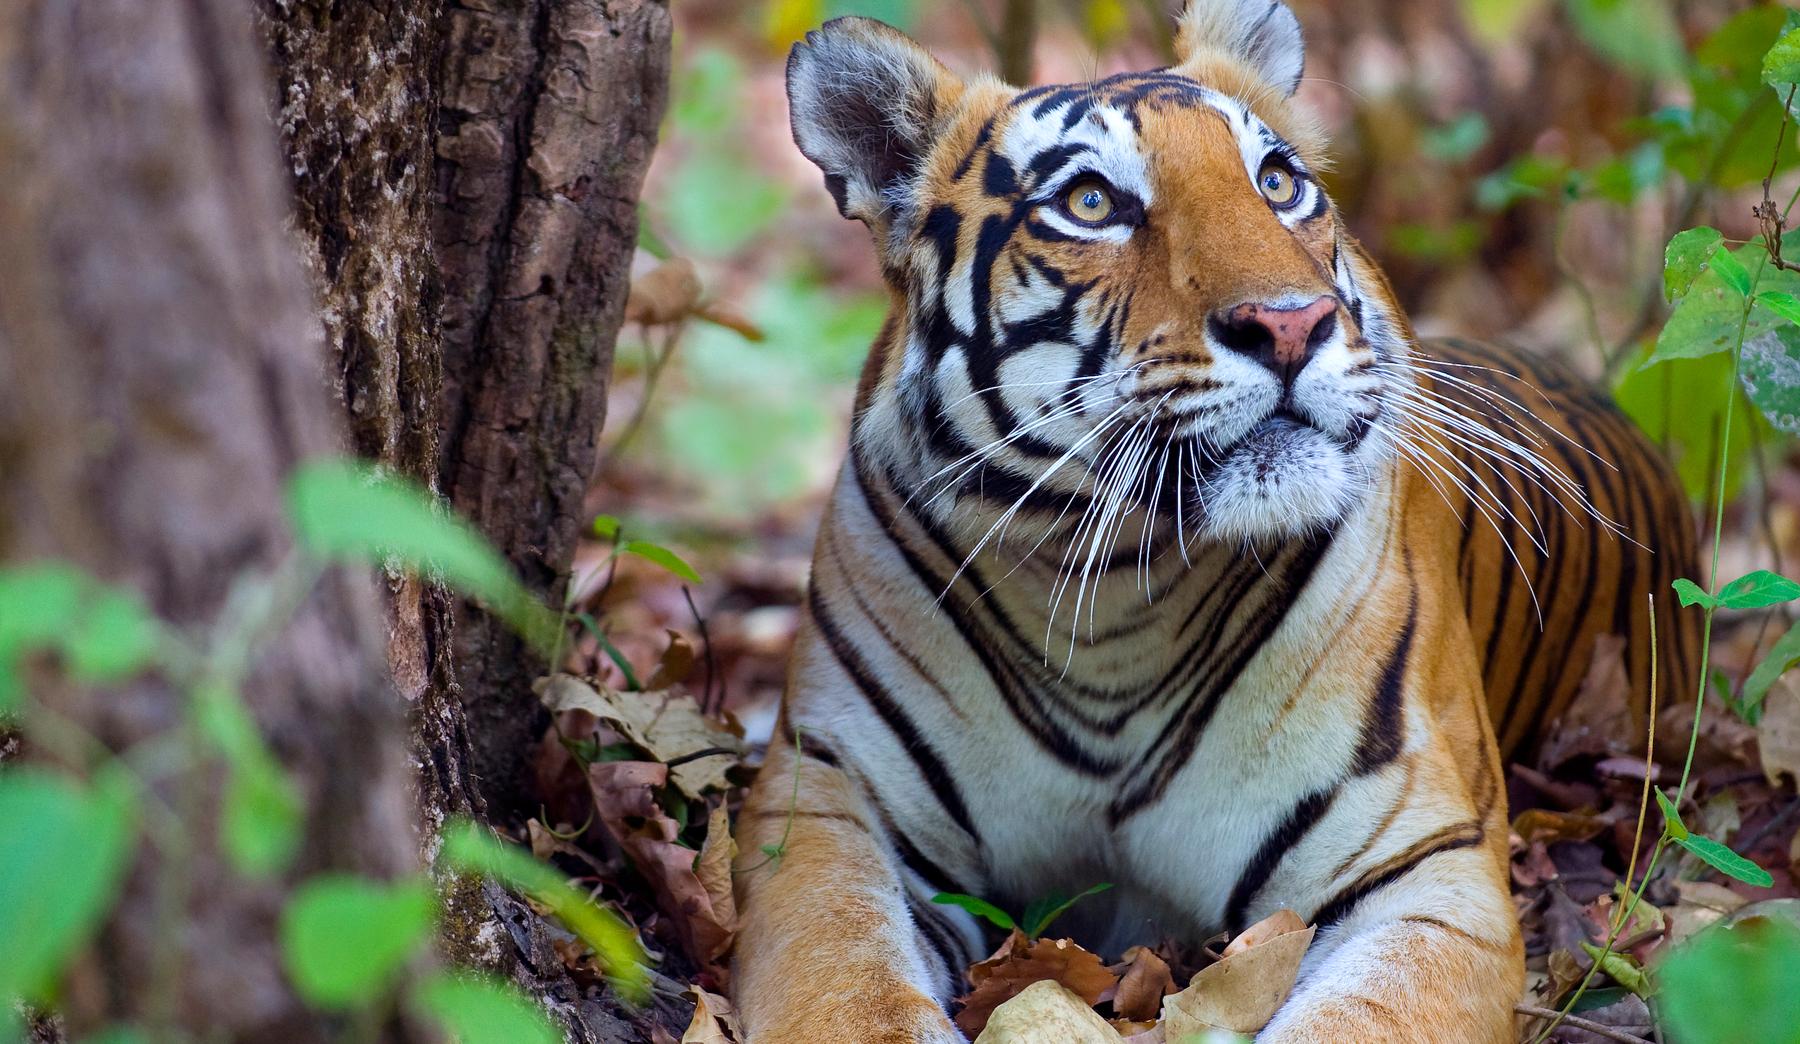 A Bengal tiger resting and looking up in a forest